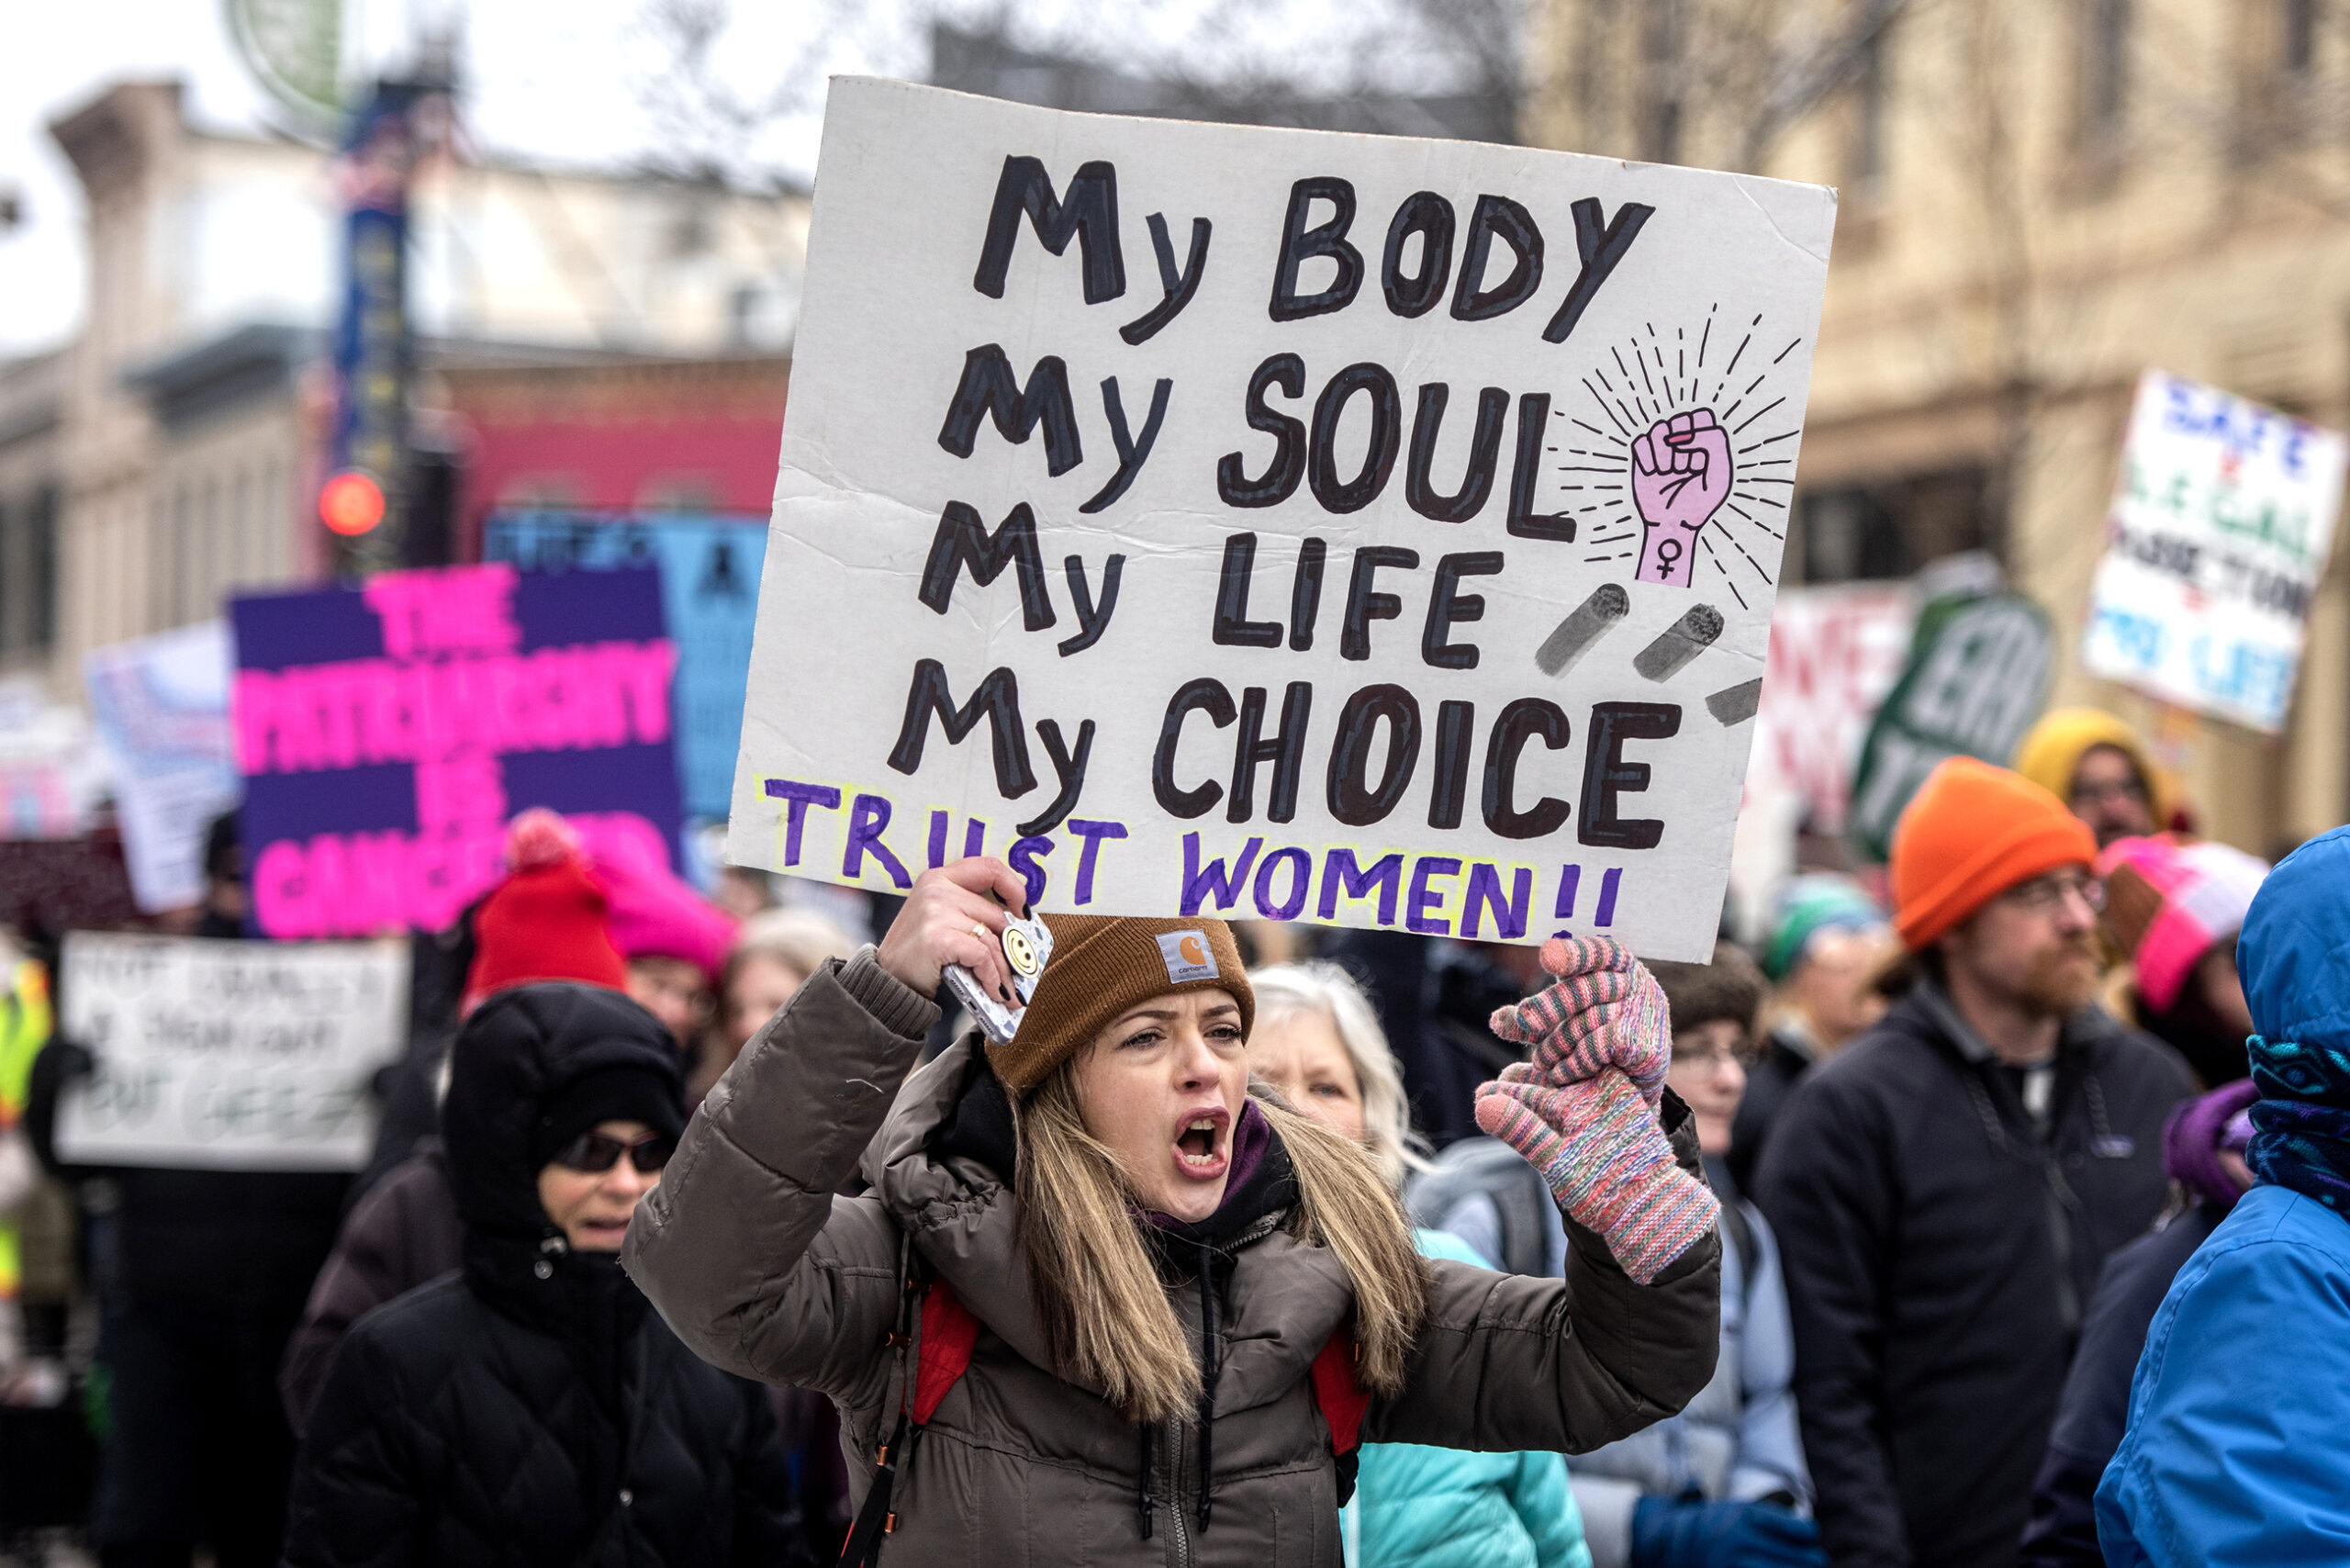 A protester's sign says "My body, my soul, my life, my choice. Trust women!!"